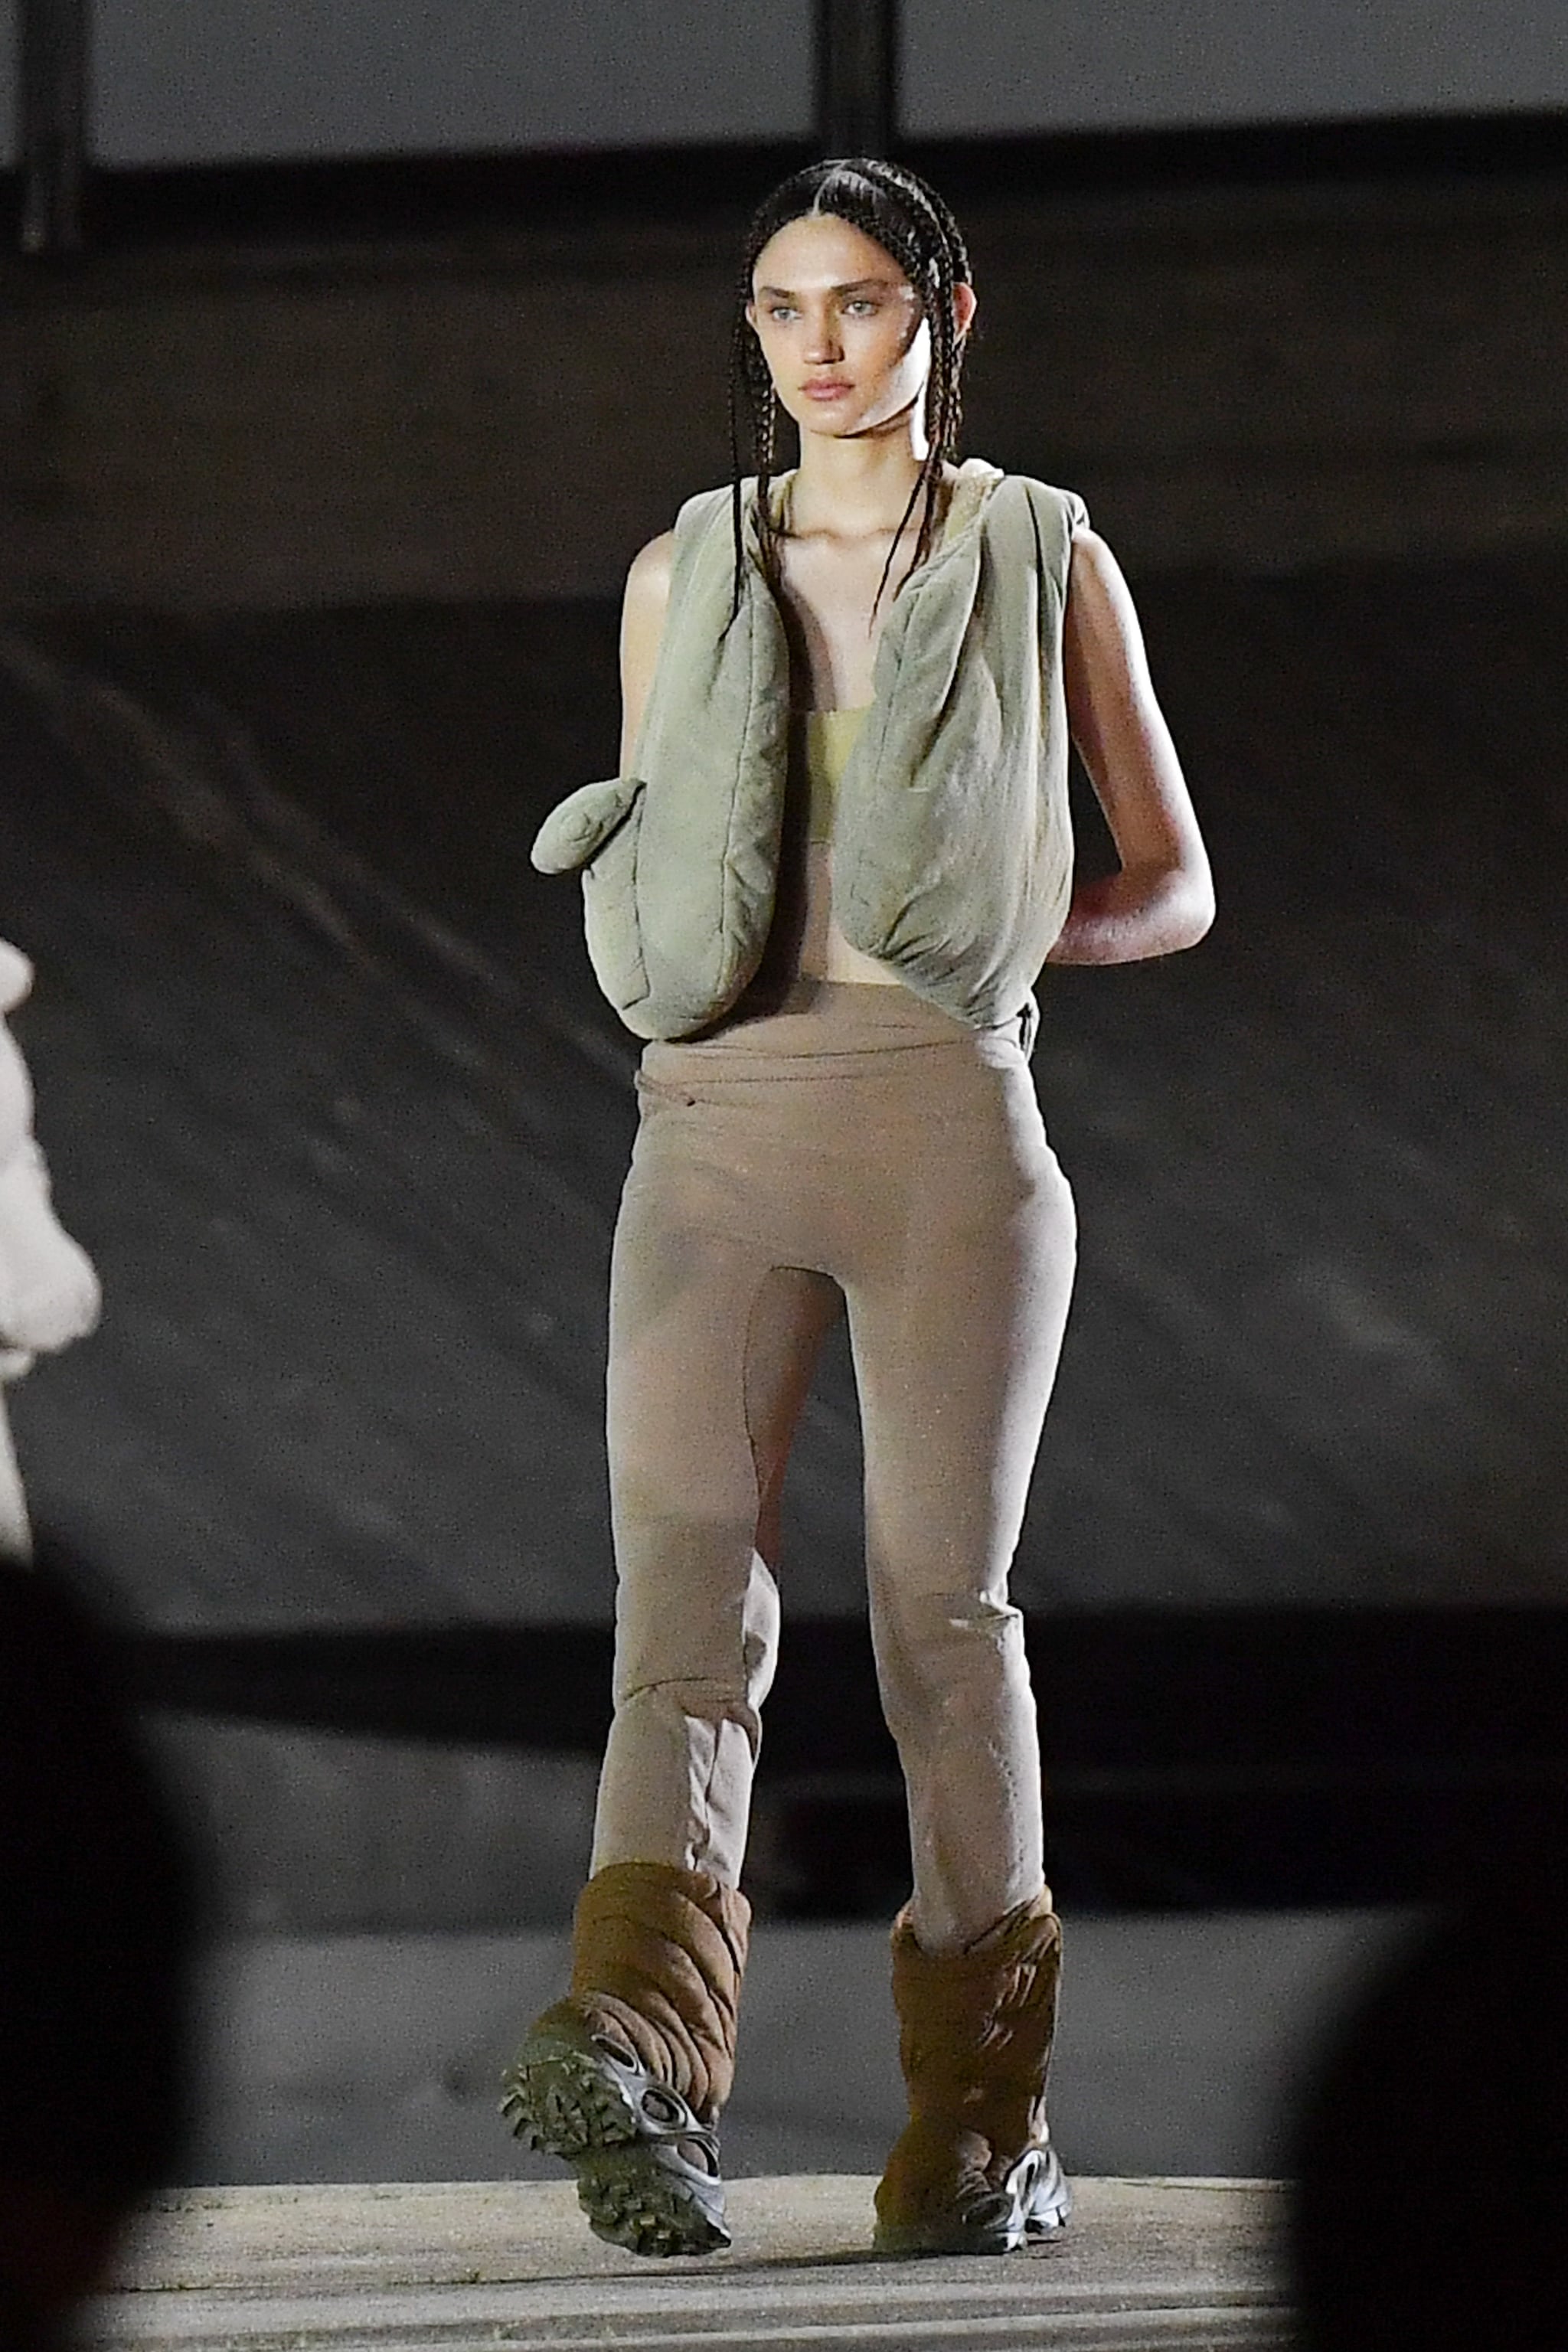 Yeezy Show Paris Fashion Week | North Wore the Cutest While Rapping at the Yeezy Show in Paris | POPSUGAR Fashion Photo 16